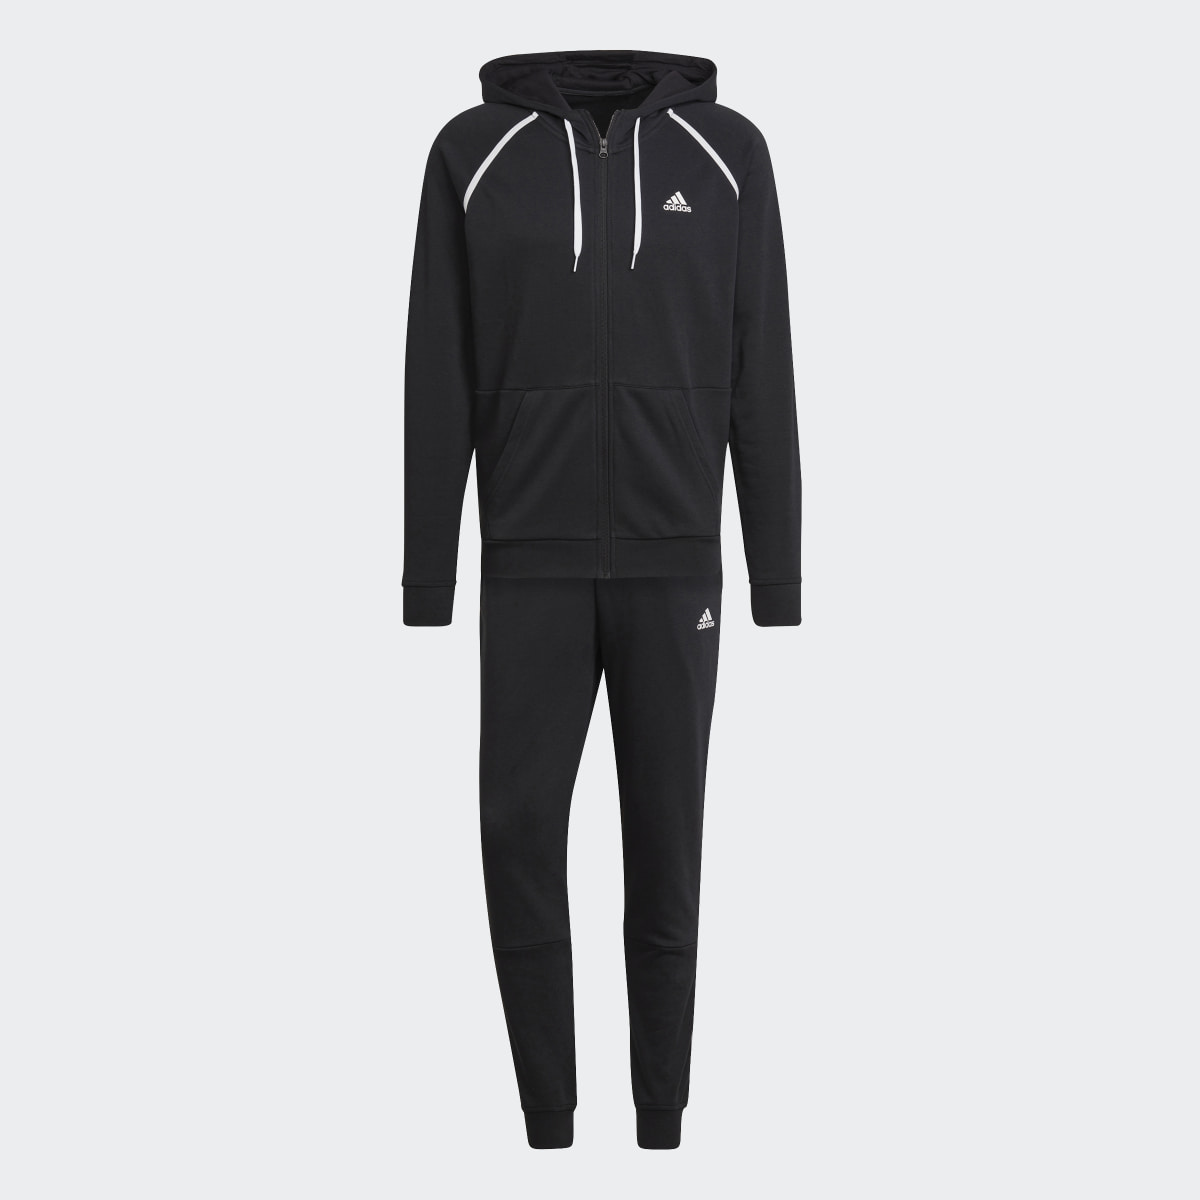 Adidas Cotton Piping Tracksuit. 5